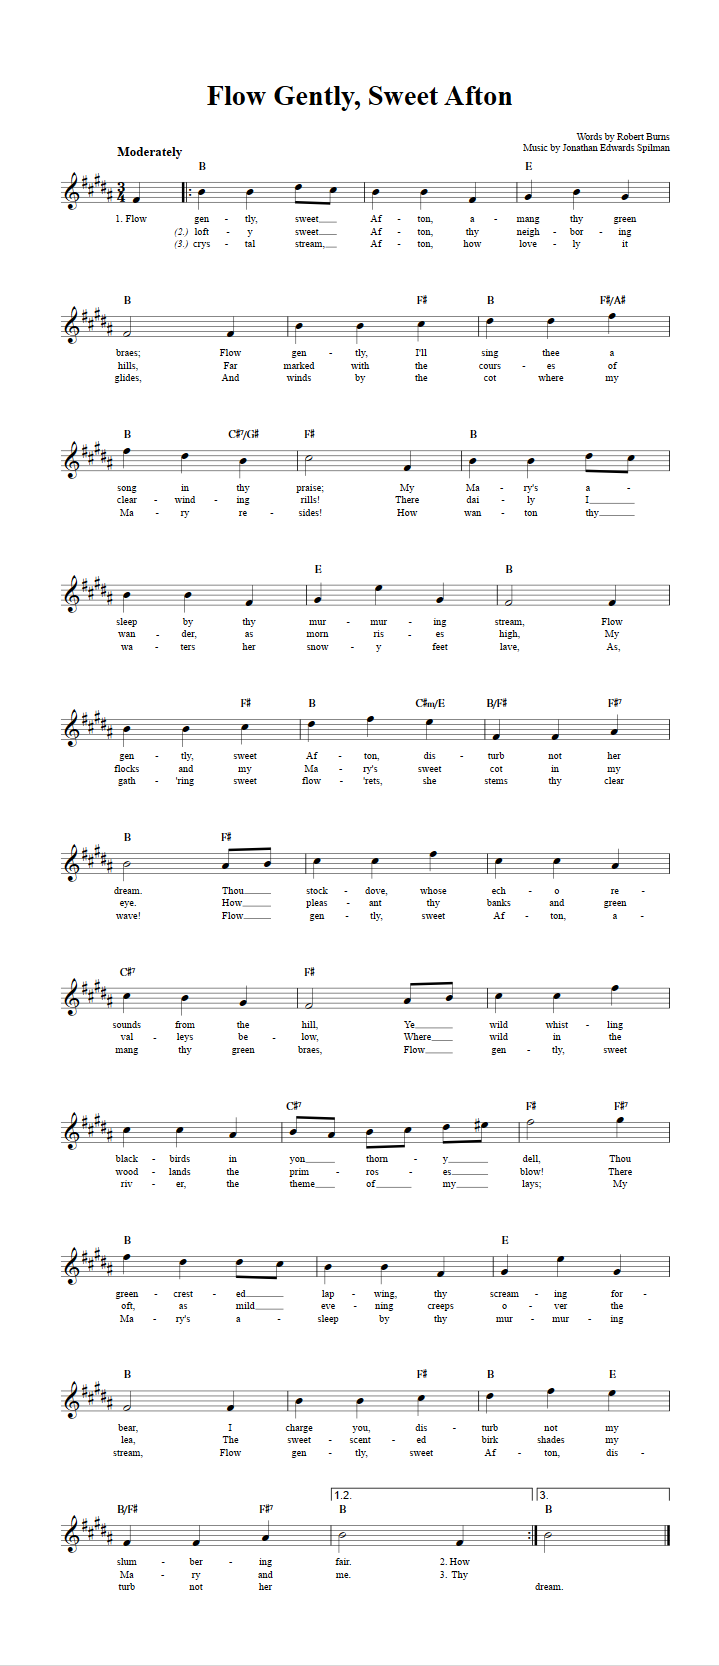 Flow Gently, Sweet Afton Sheet Music for Clarinet, Trumpet, etc.